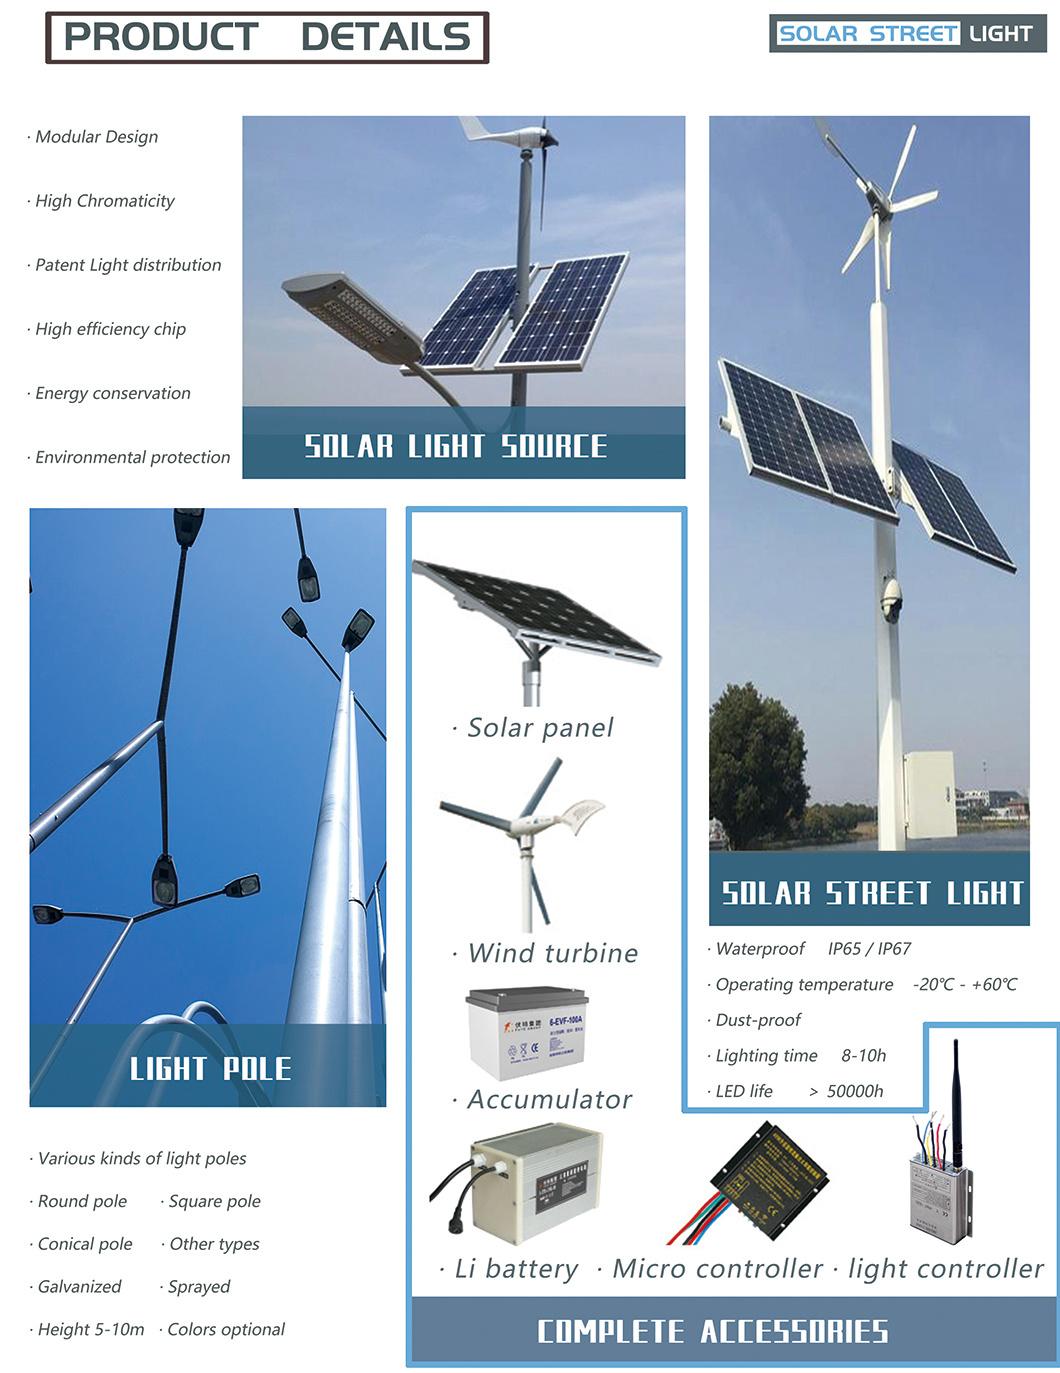 Ala Integrated All in One Solar Street Light 100W 200W 300W Solar Lamp Hot Sale Products